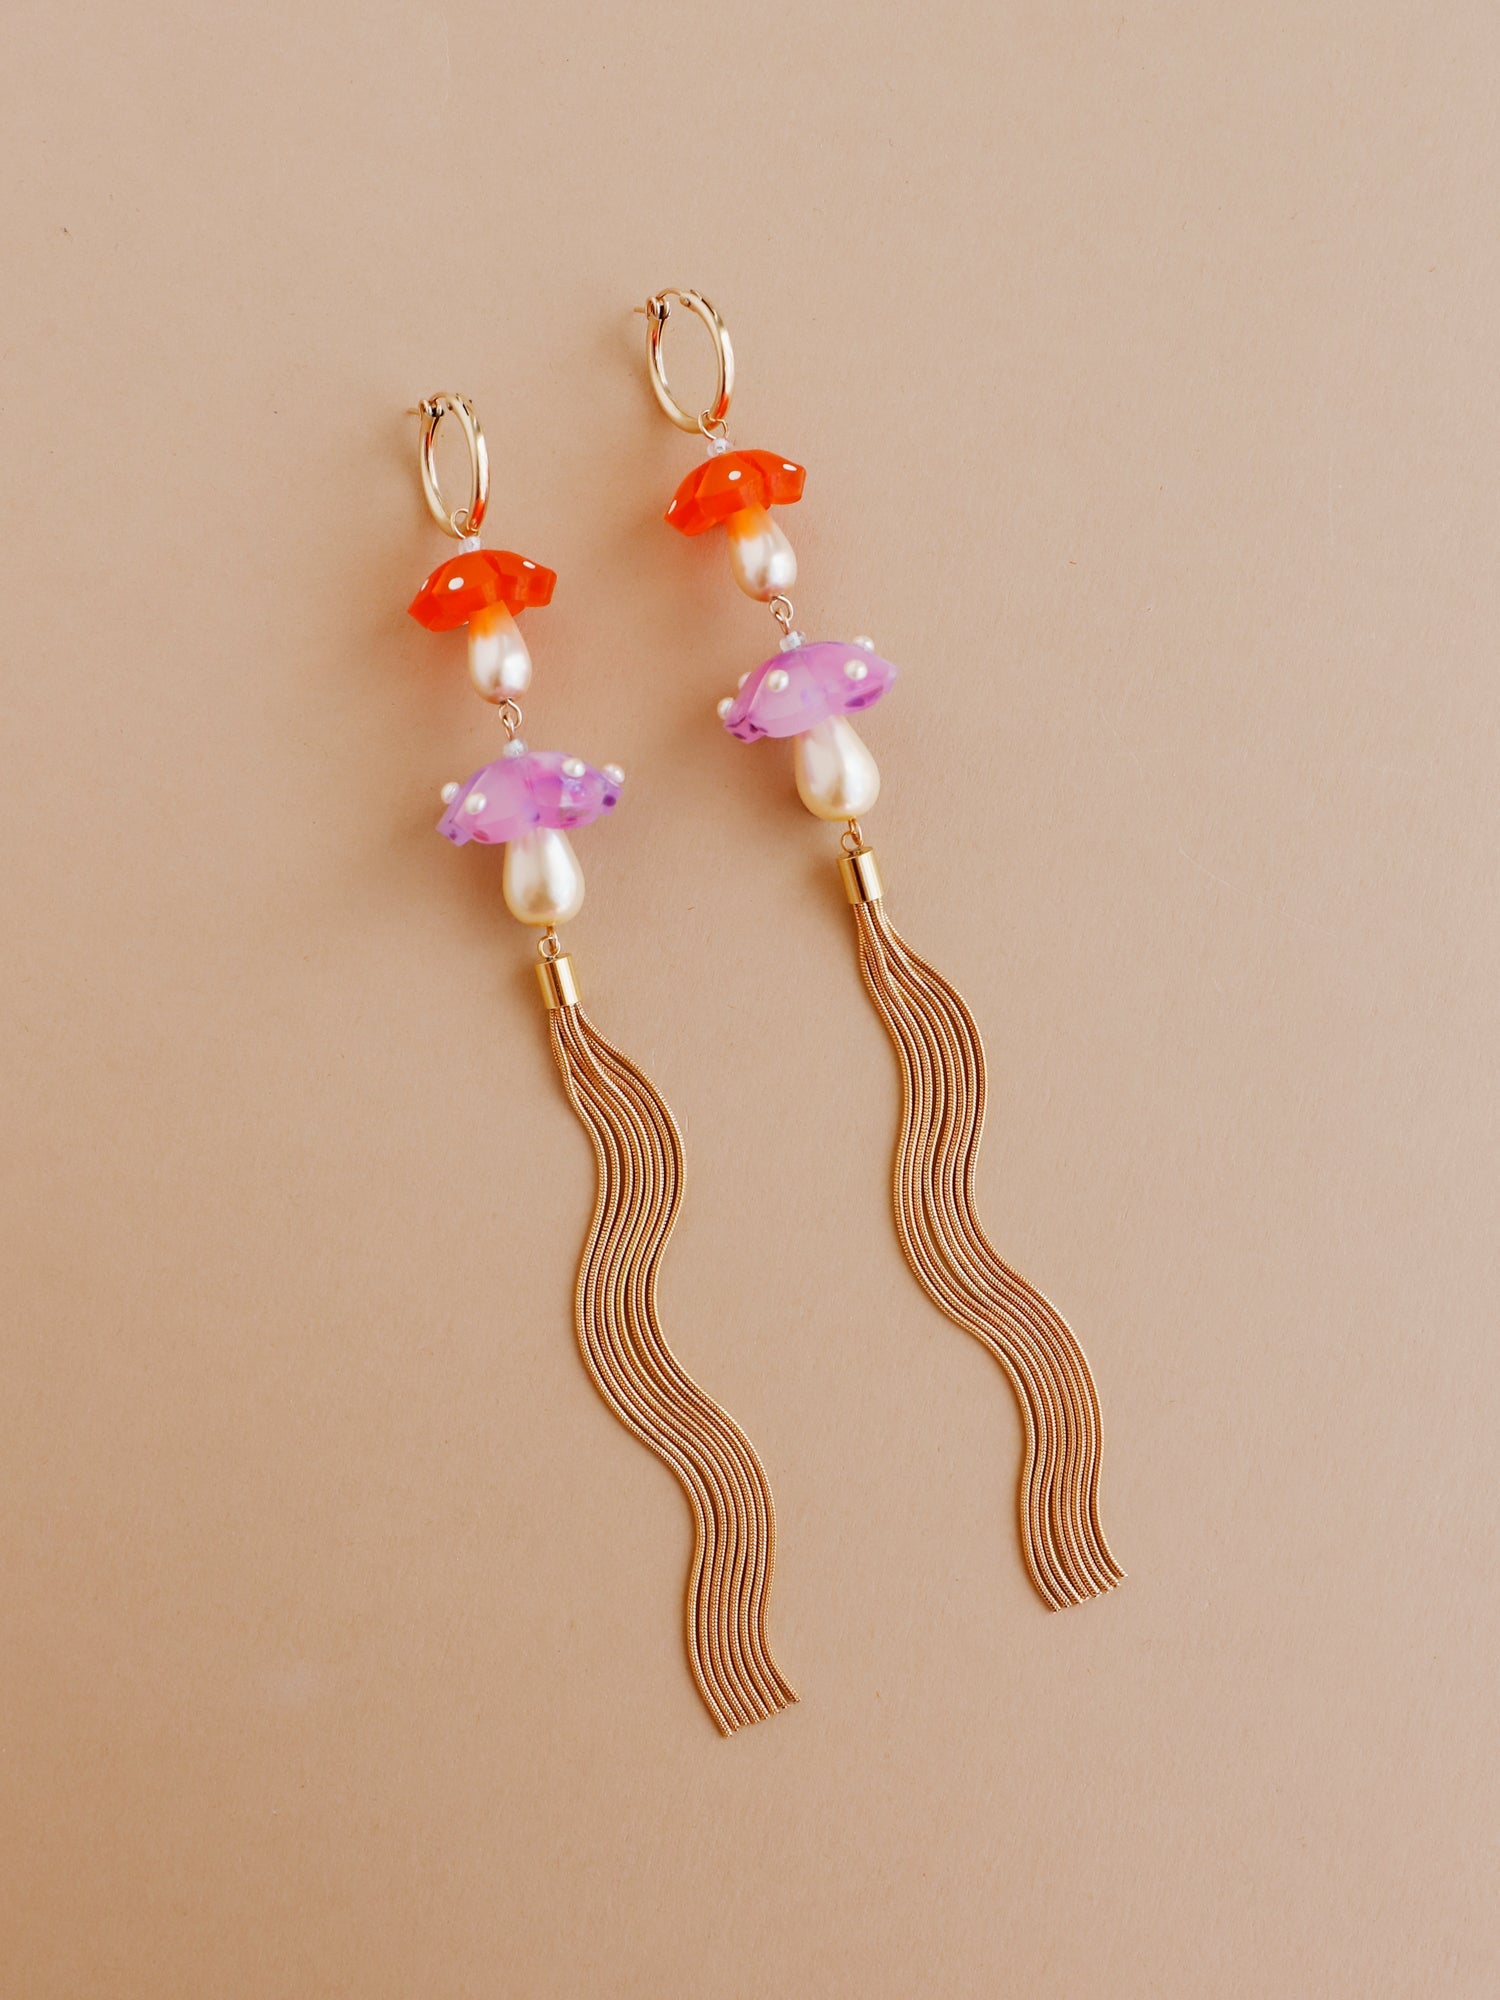 Double mushroom hoop earrings in lavender with snake chain tassels. Made from heat-formed acrylic with hand-inked details and finished off with high quality Czech glass pearls. Handmade in the UK by Wolf & Moon.